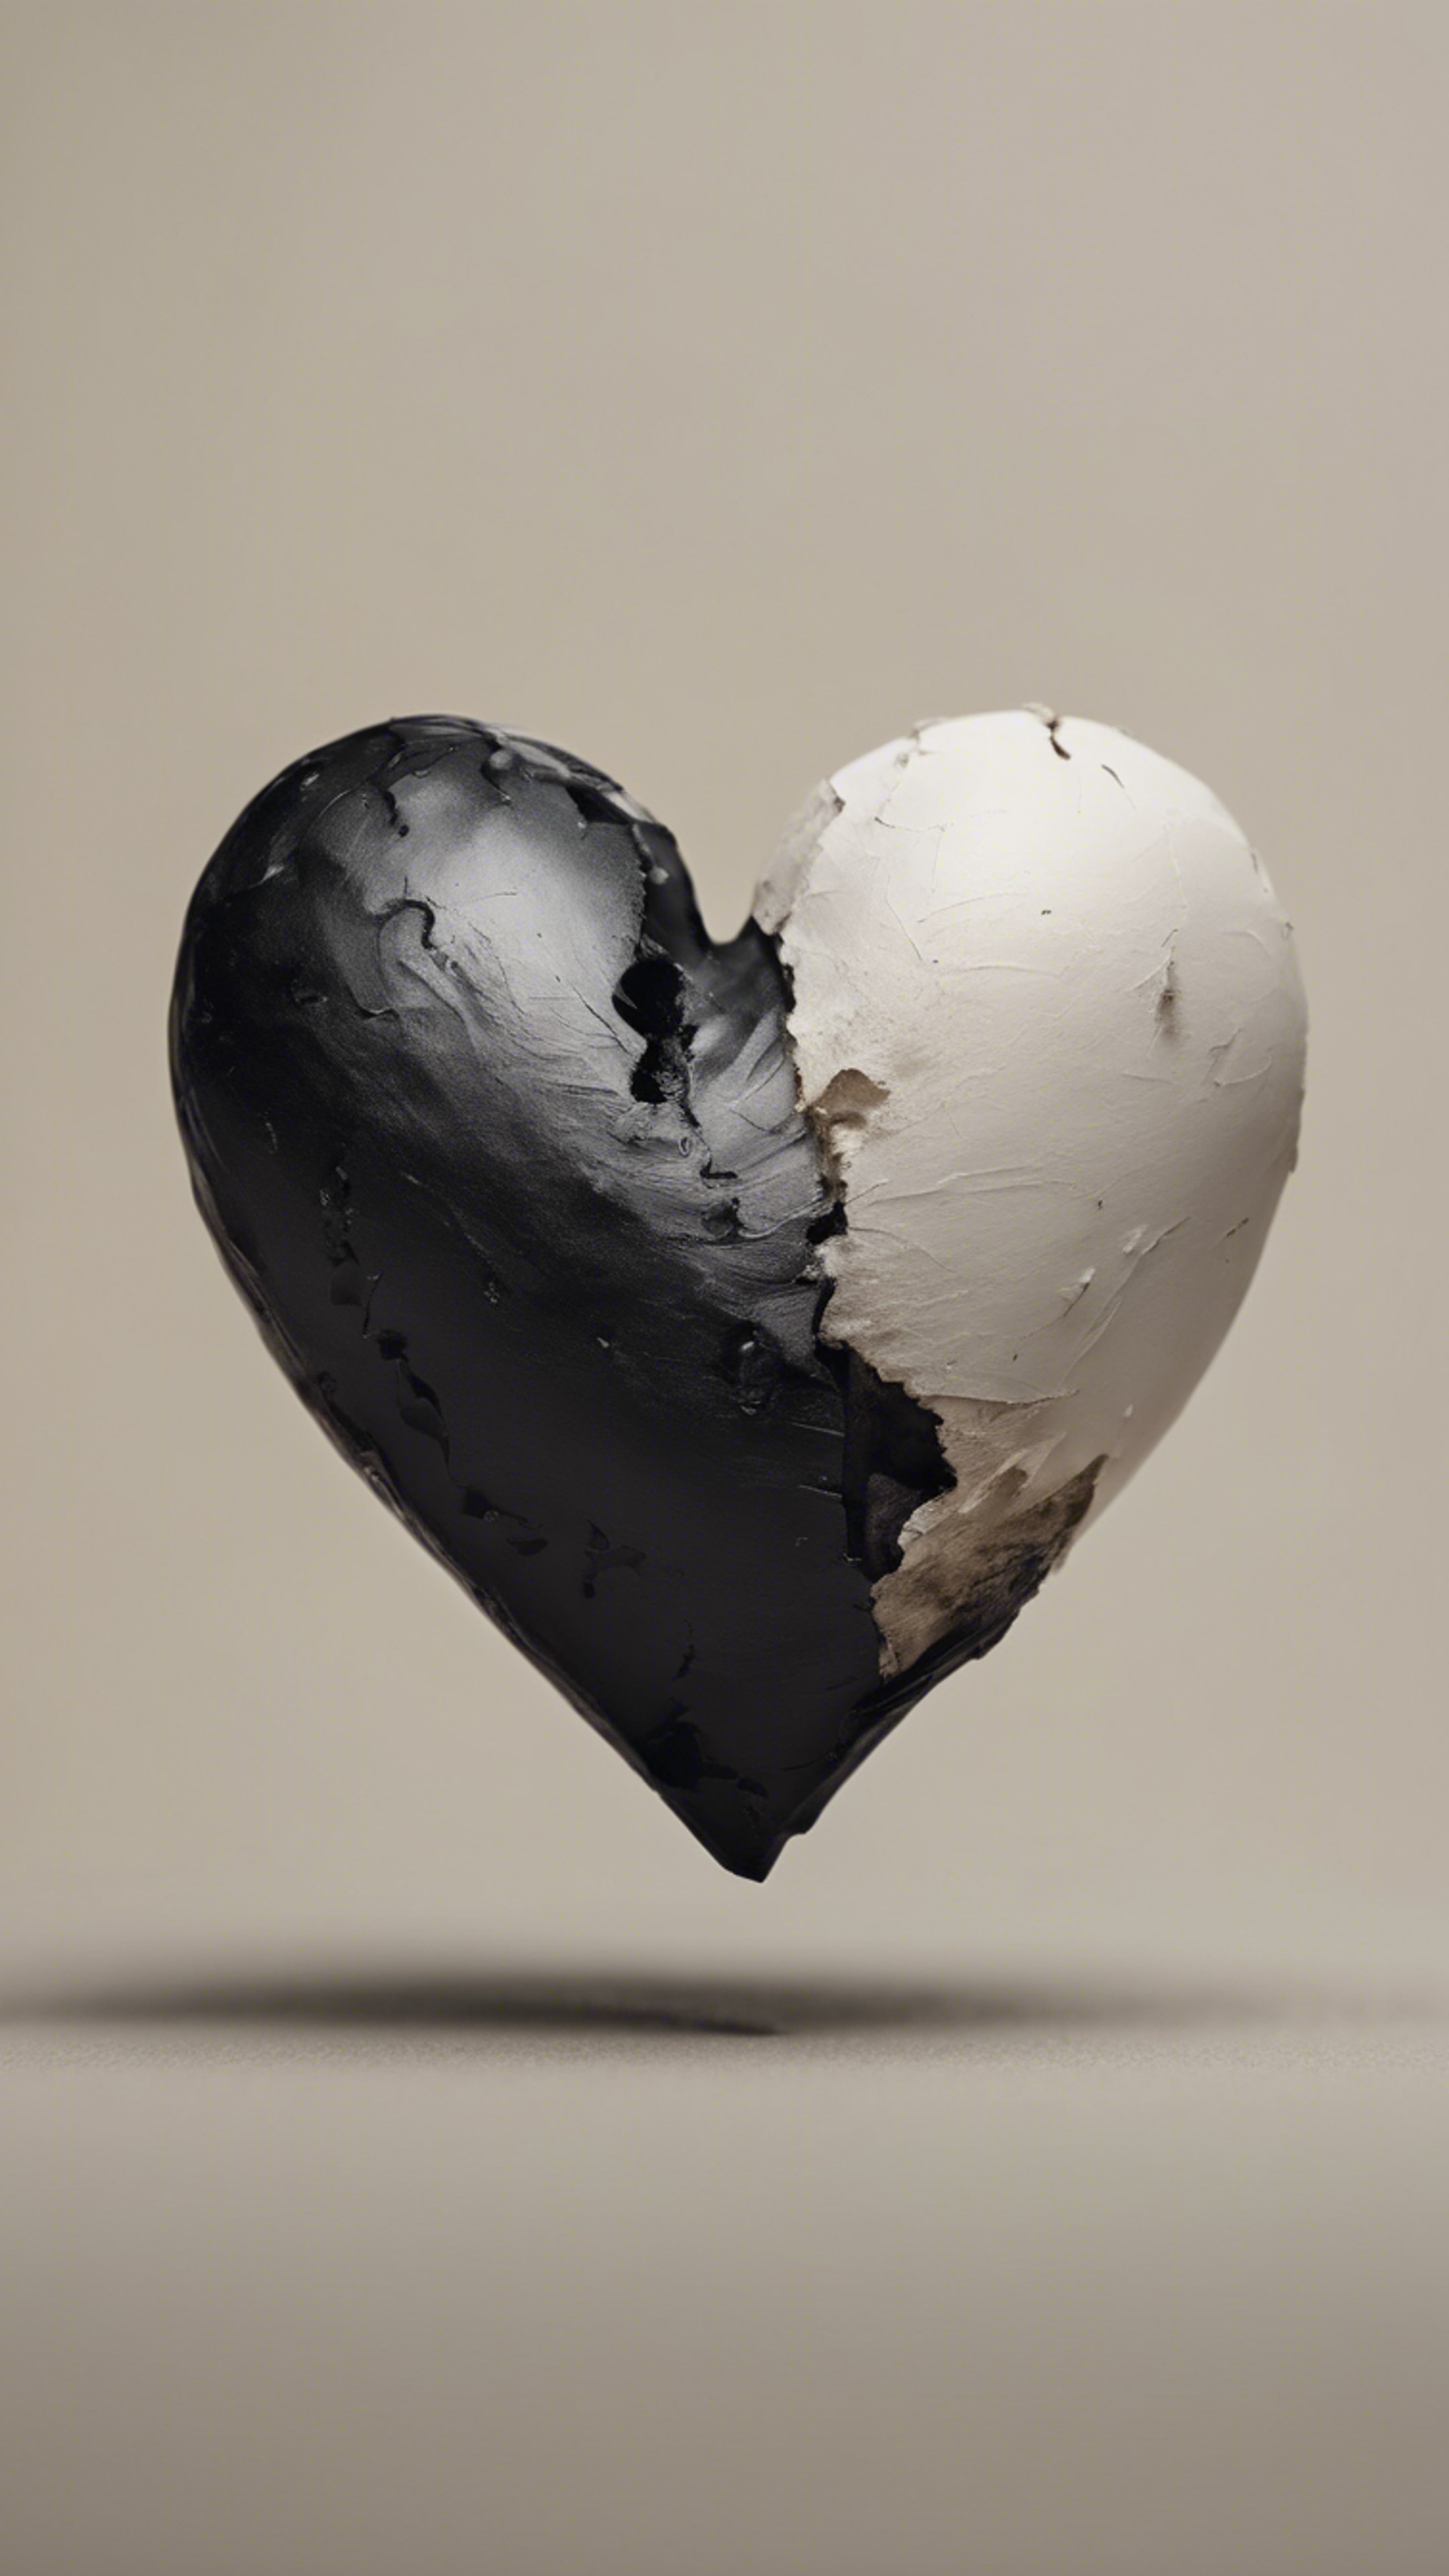 A black heart on one side and a white heart on the other side, against a neutral color background. Tapetai[e1ad96bec27b409fa1a8]